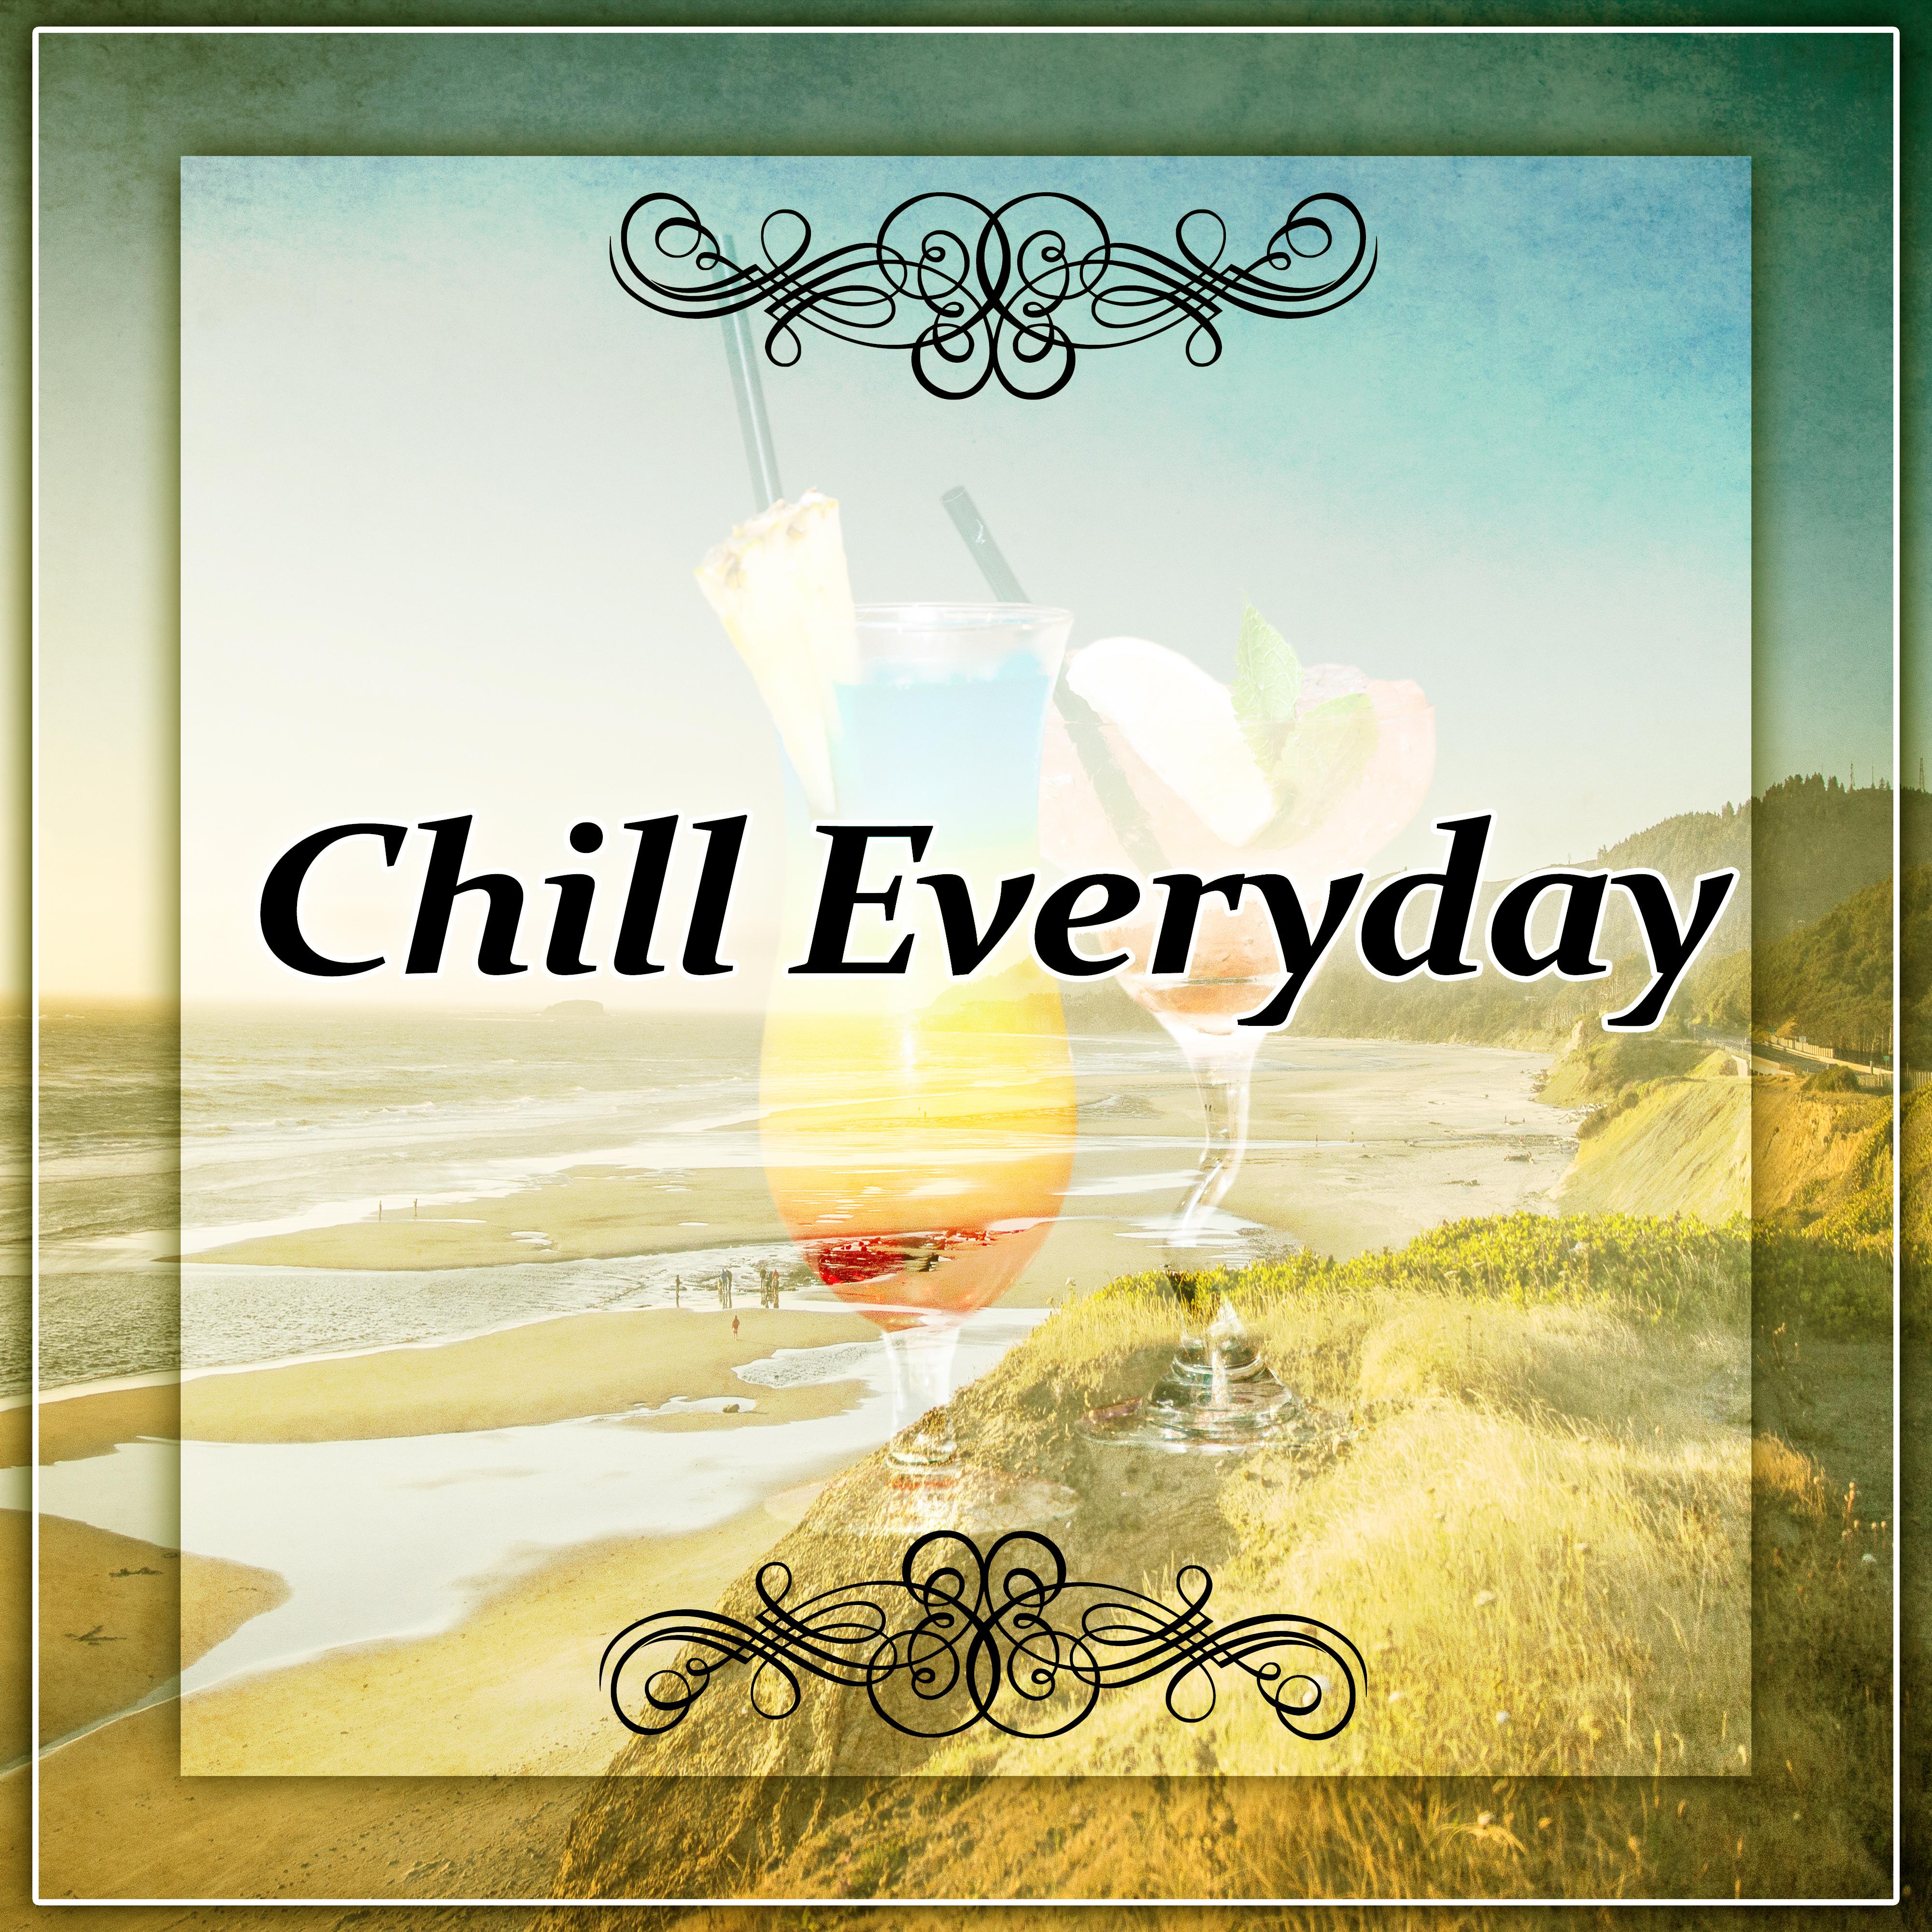 Chill Everyday – Smoke, Drink & Chill, Relaxing Chill Out Music